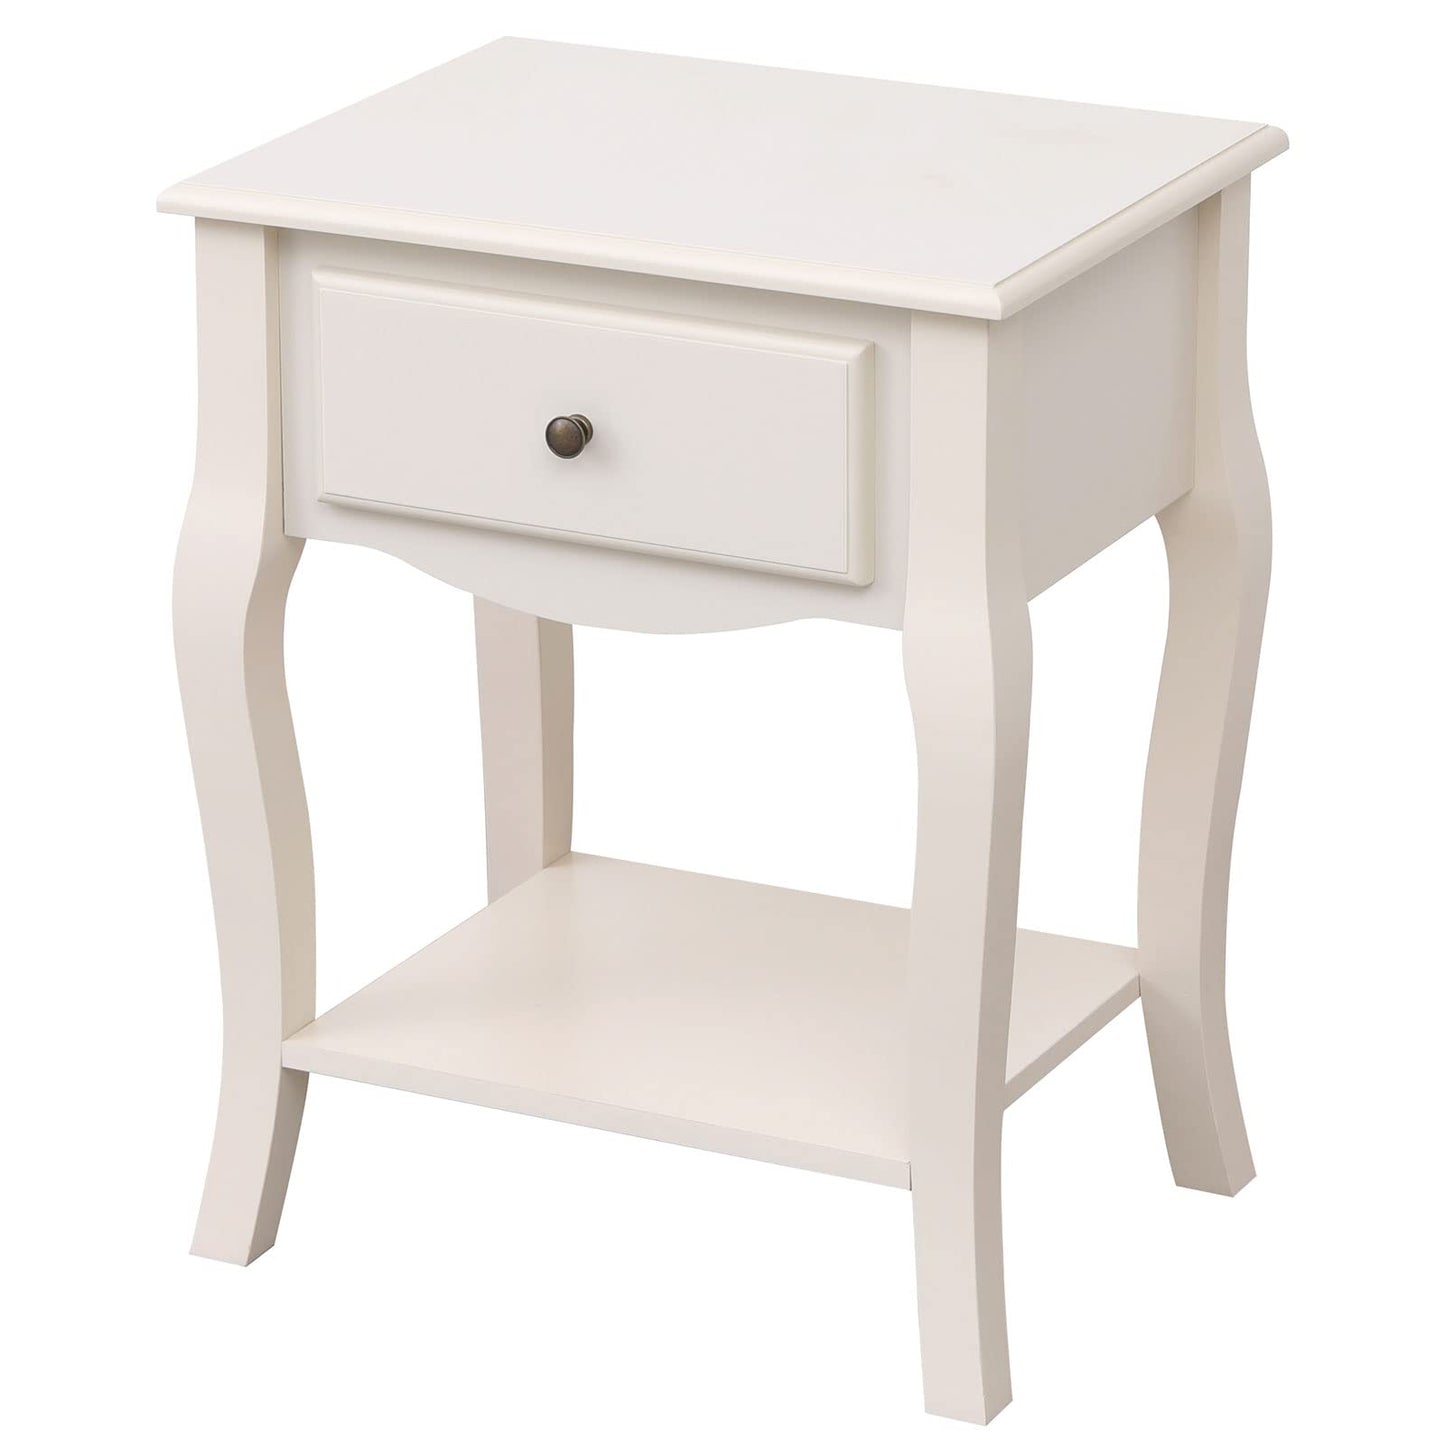 SogesHome Wooden Nightstand End Table with Drawer Sofa Side Table Bedside Lamp Table Accent Table for Living Room Bedroom, White